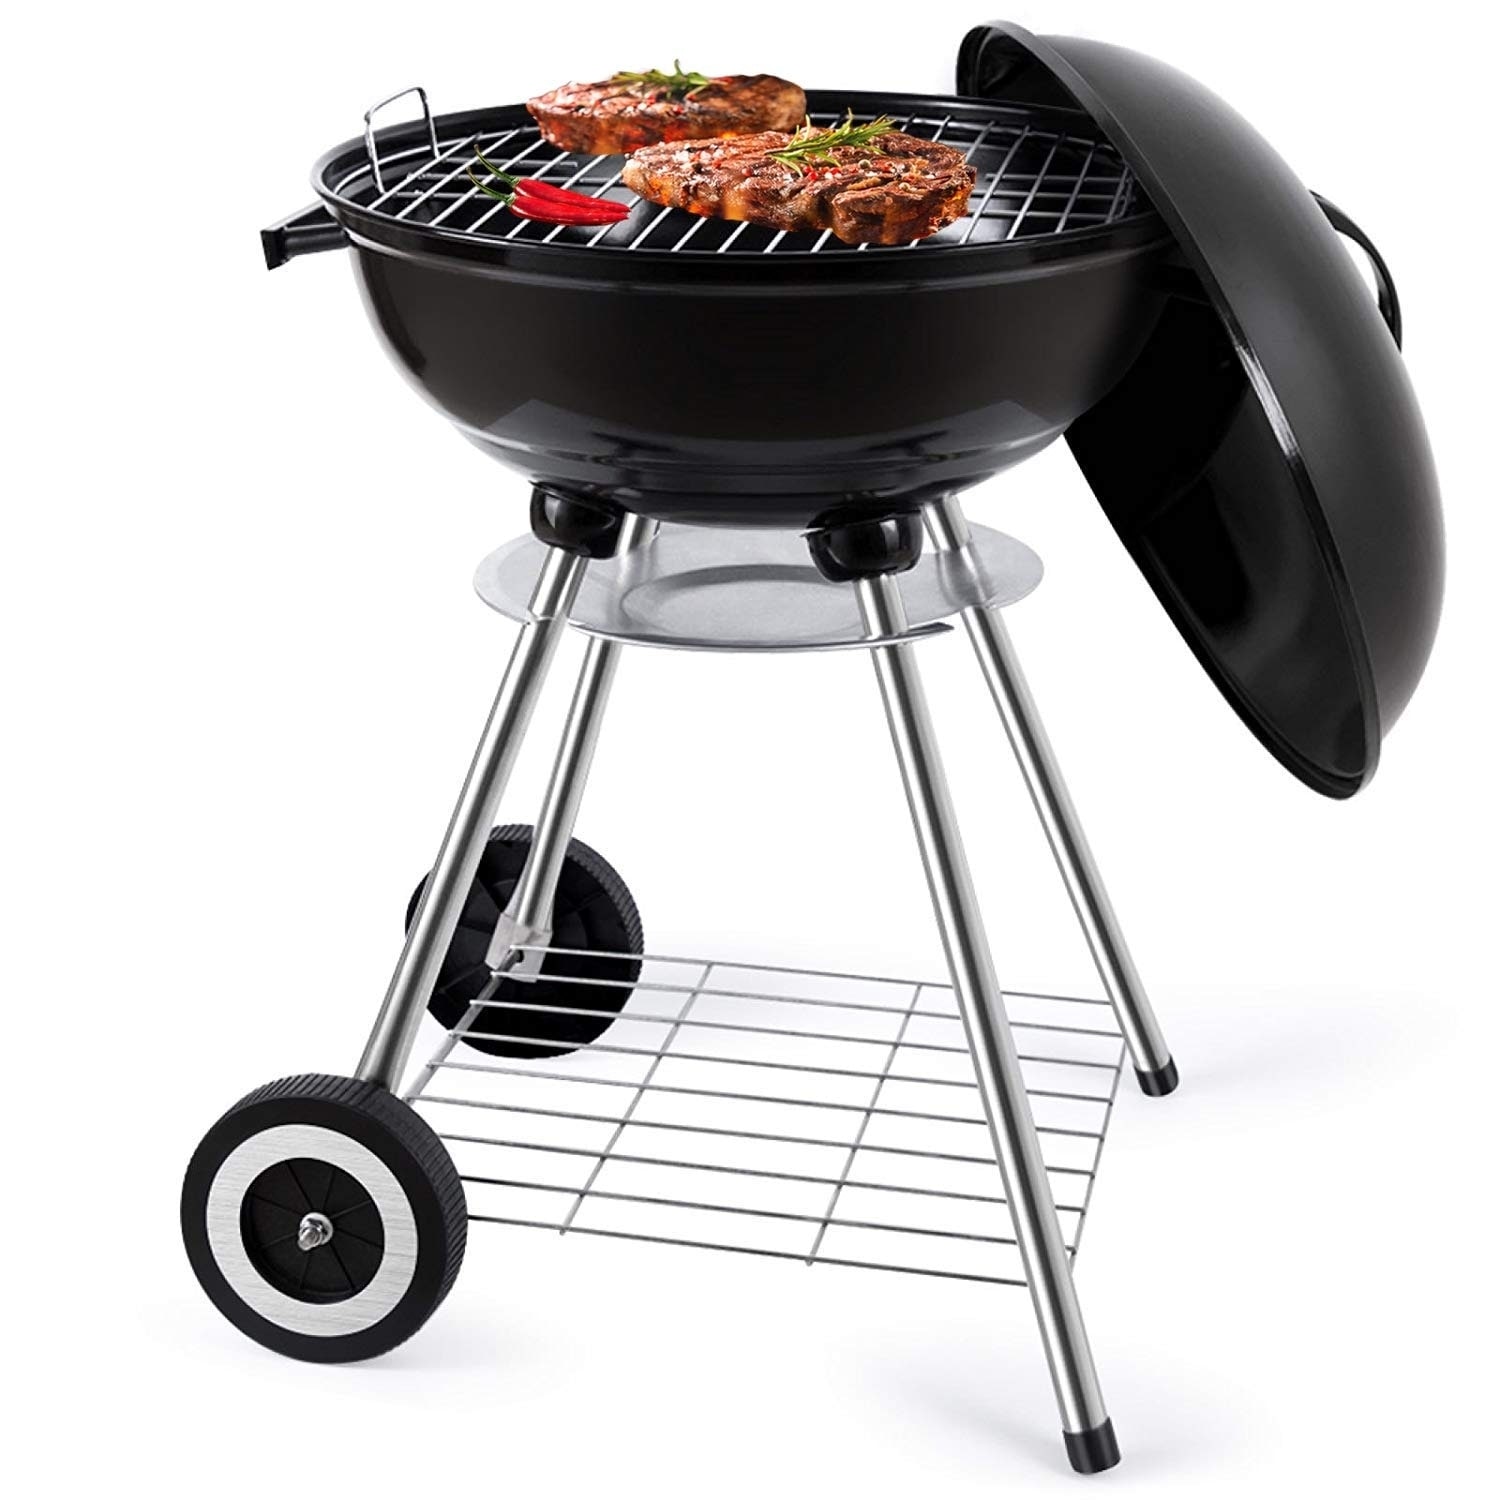 Negociar Cadena pandilla Original Kettle Charcoal Grill Outdoor Portable BBQ Grill Stainless Steel  18" Black Kettle Grill - On Sale - - 30143736